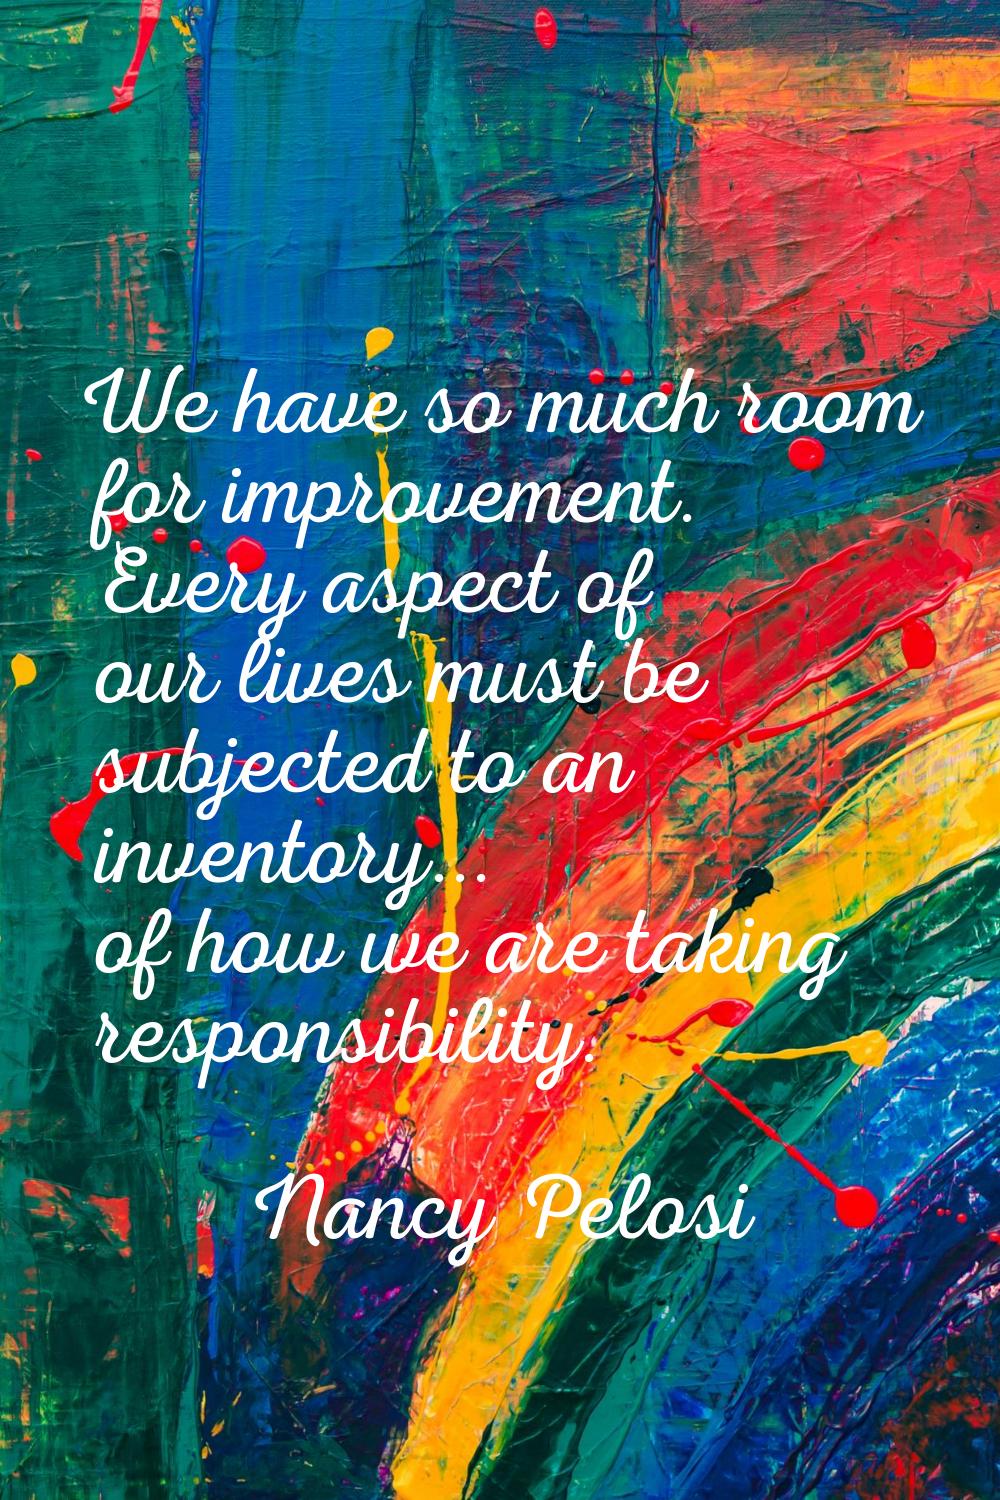 We have so much room for improvement. Every aspect of our lives must be subjected to an inventory..